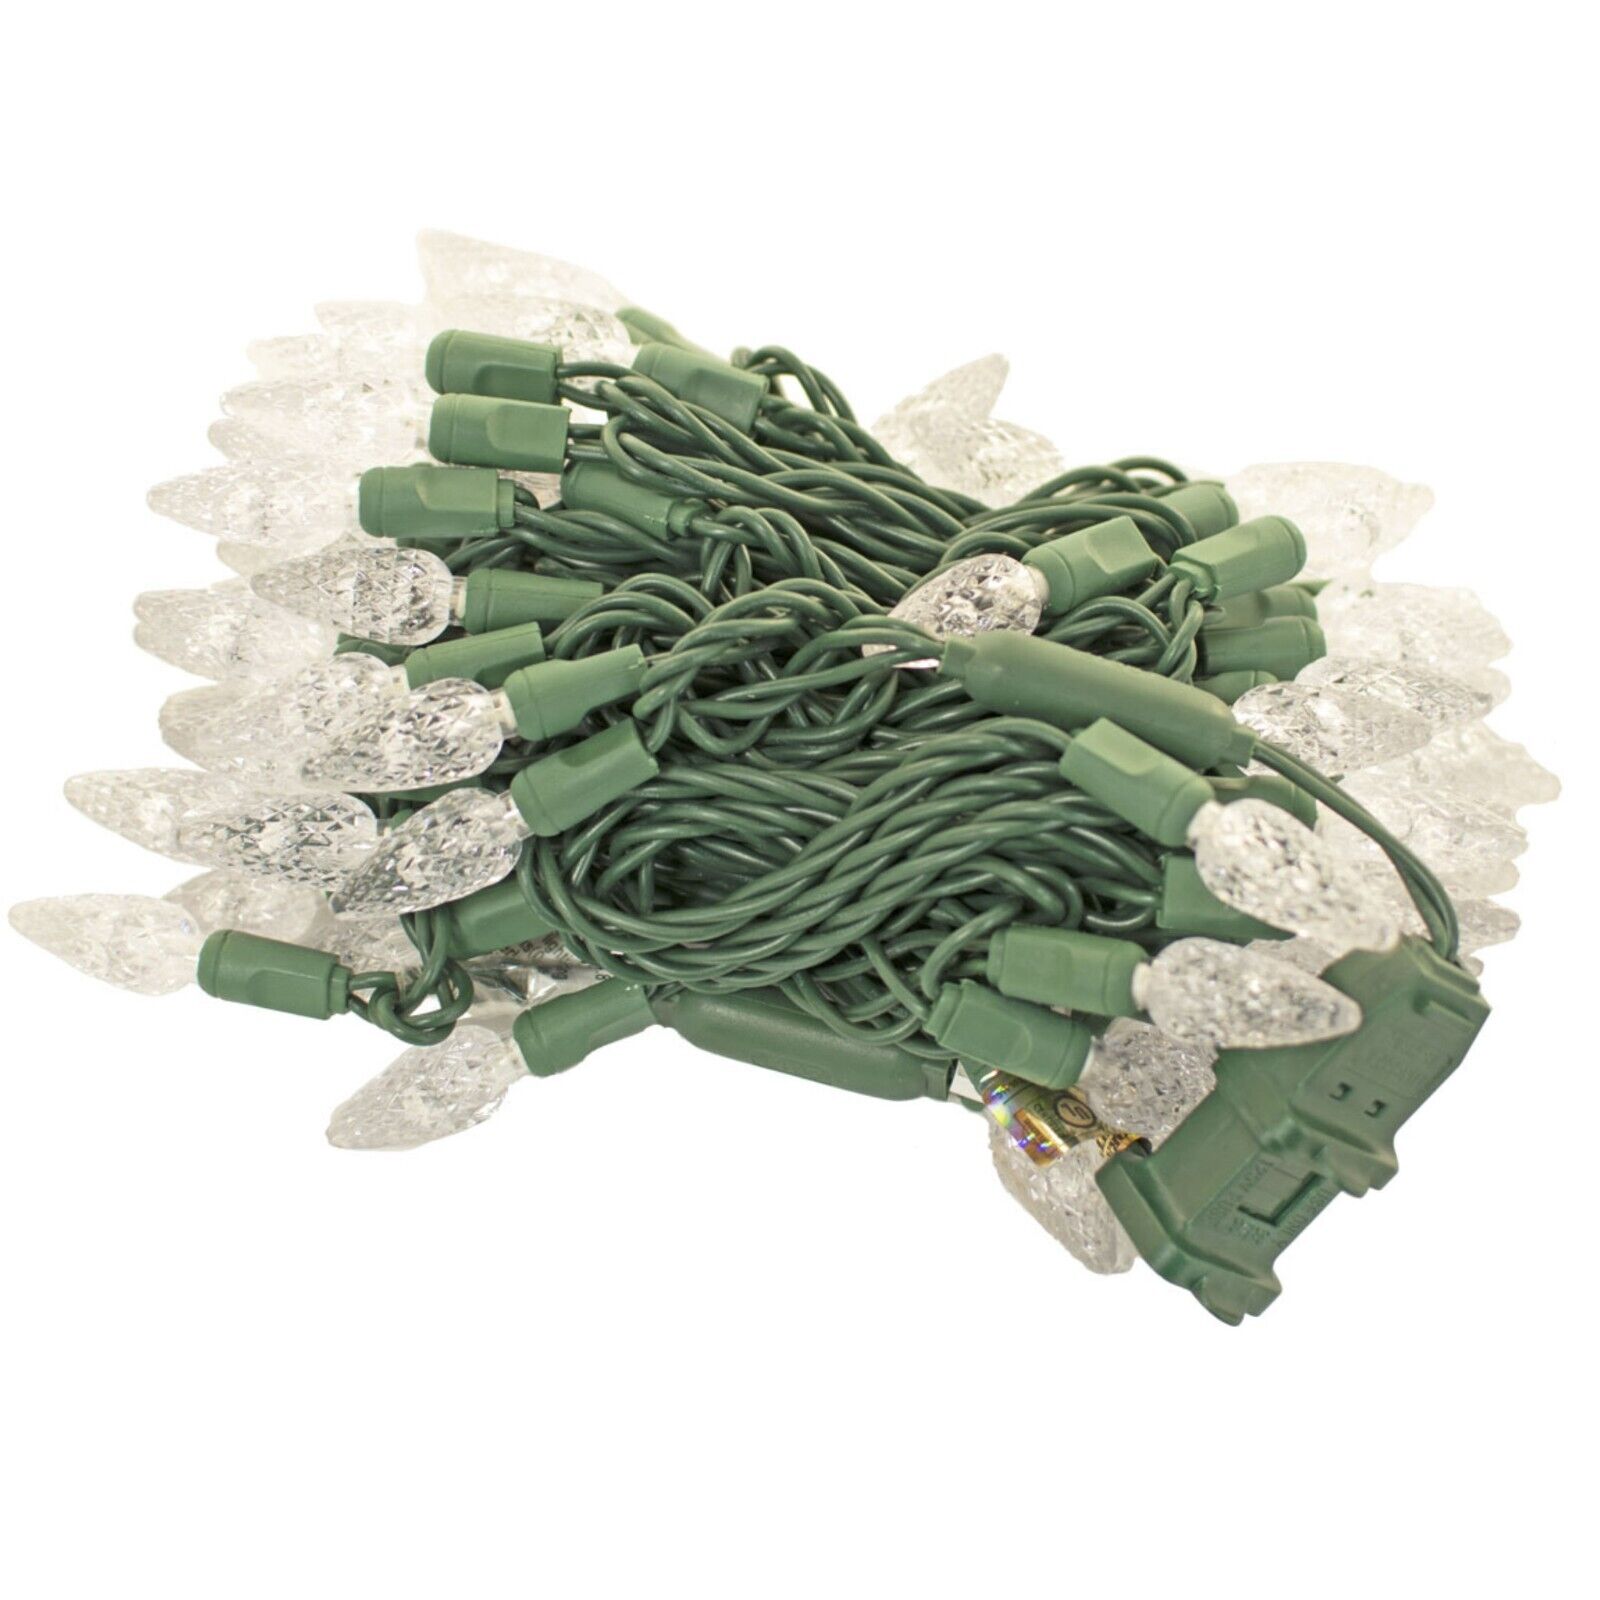 23FT Warm White LED Christmas Lights C6 Green Wire Steady Lighting 70L 23\'